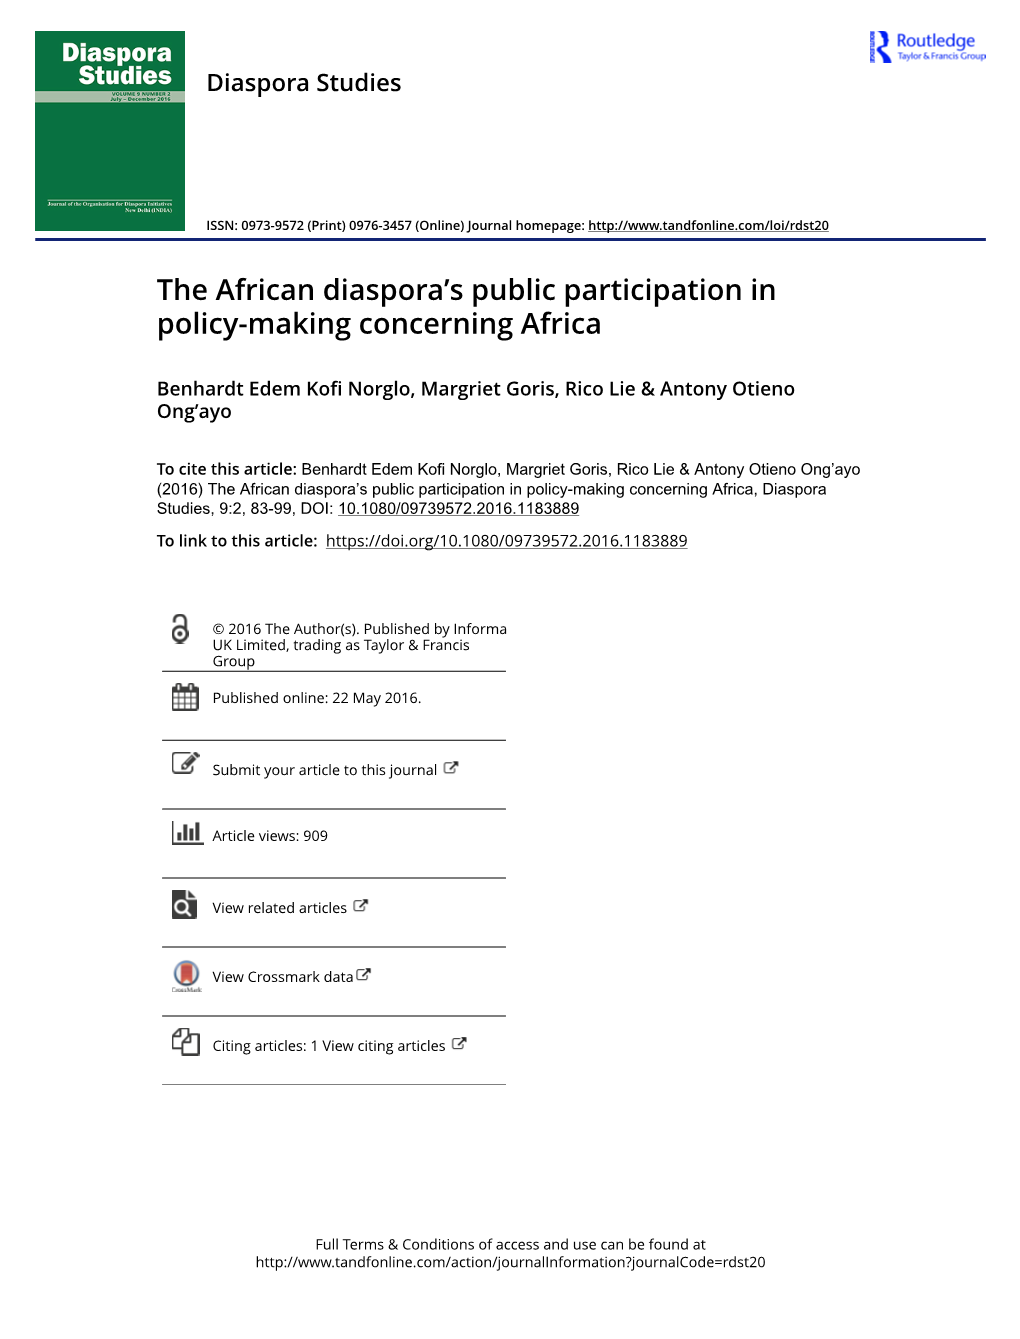 The African Diaspora's Public Participation in Policy-Making Concerning Africa